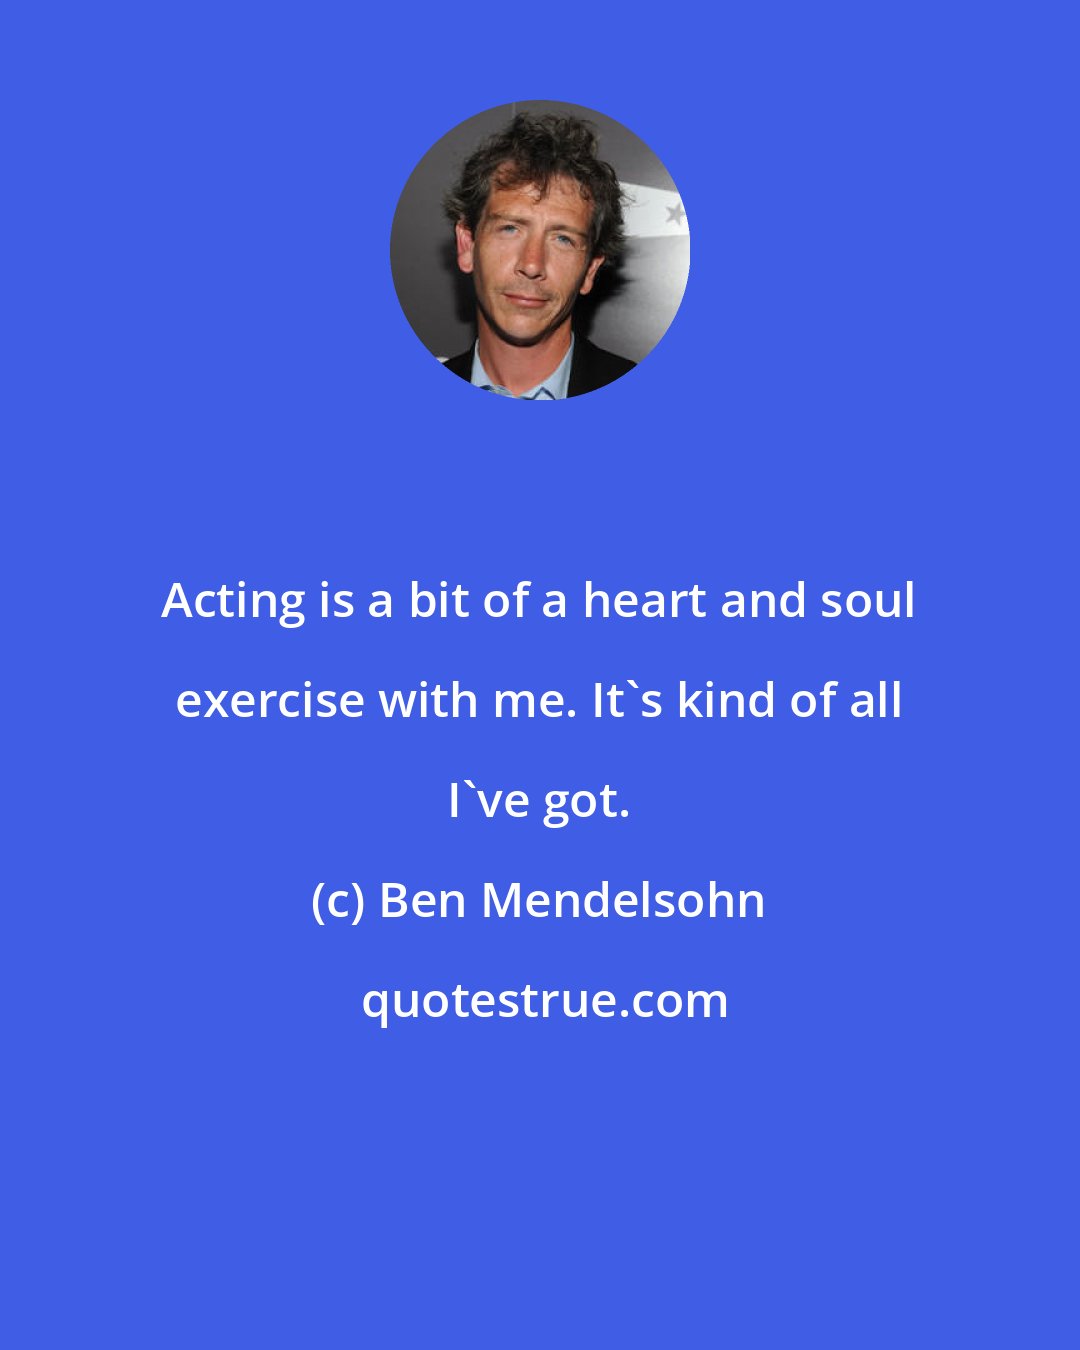 Ben Mendelsohn: Acting is a bit of a heart and soul exercise with me. It's kind of all I've got.